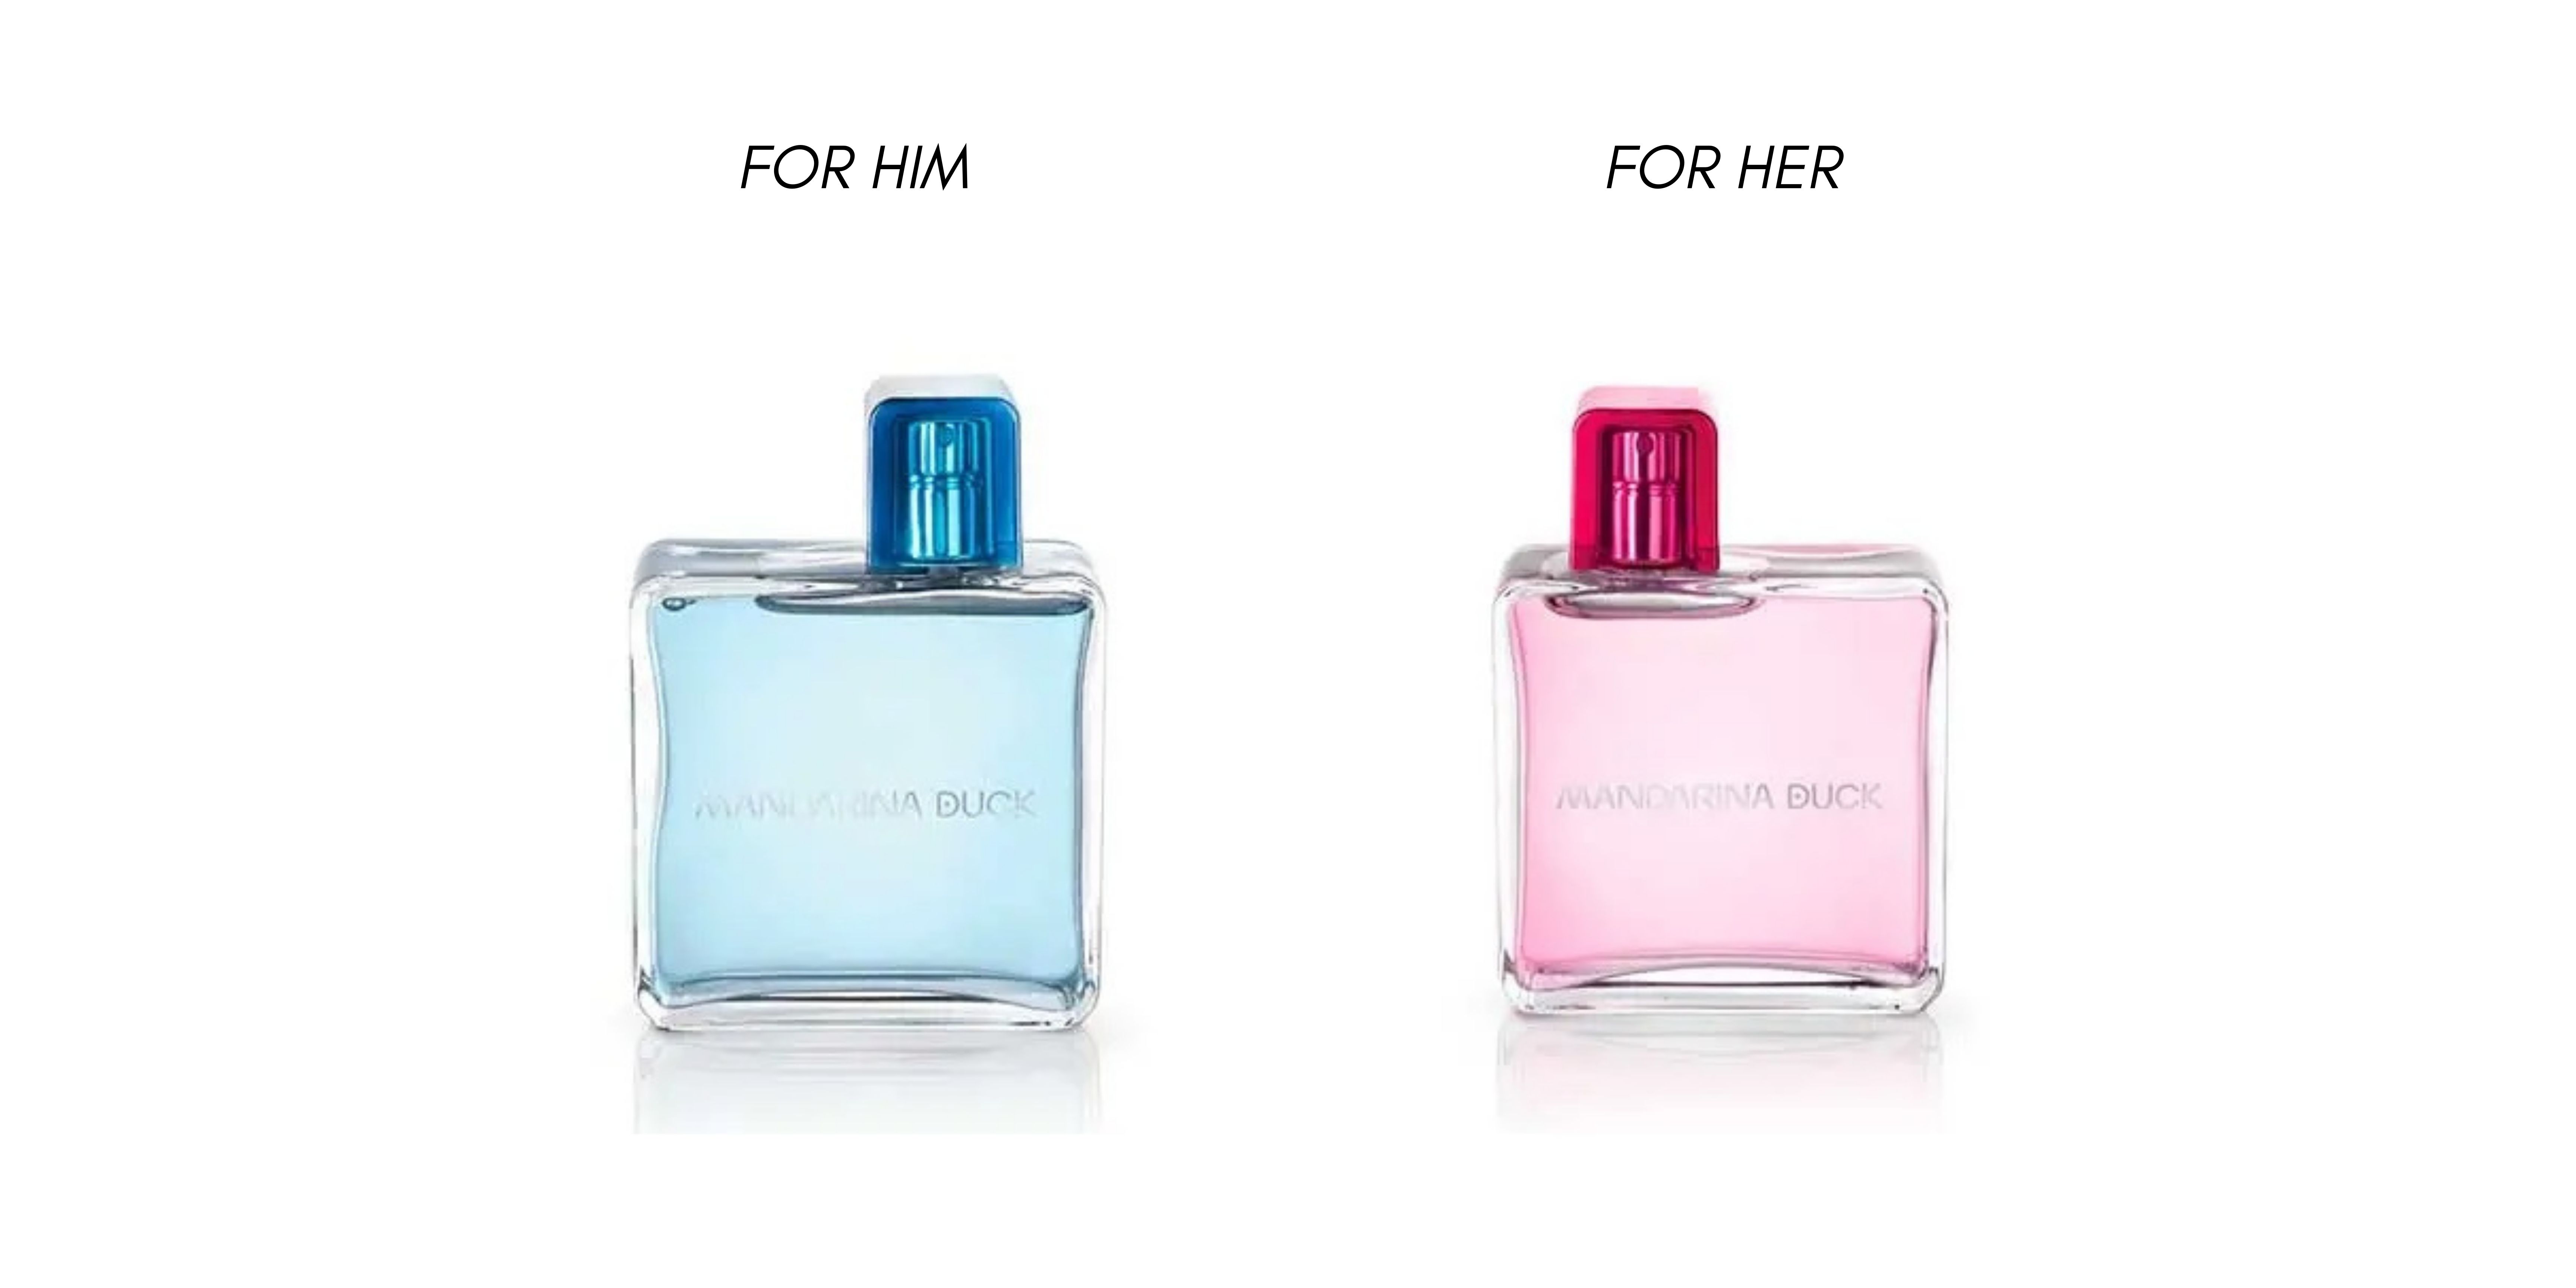 Mandarina Duck For Him and For Her